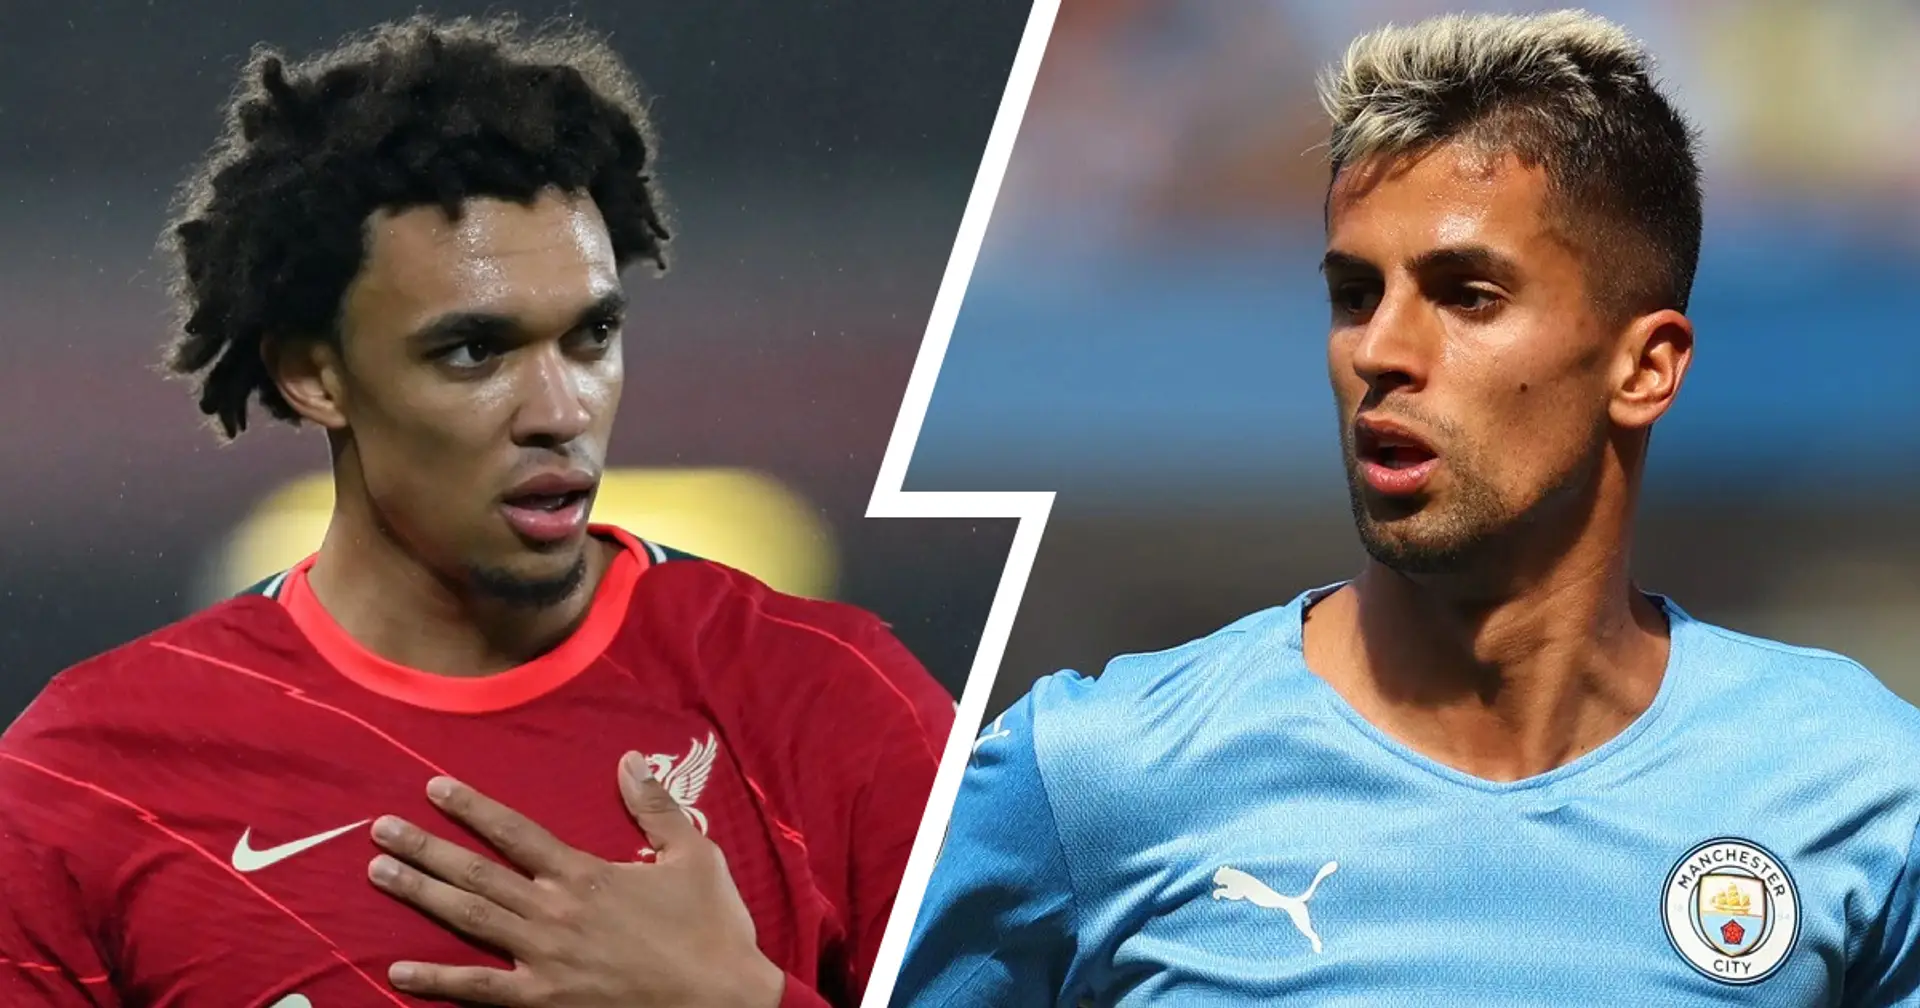 'No question': Fan claims Man City's Cancelo is better than Trent, stats prove he's hugely mistaken